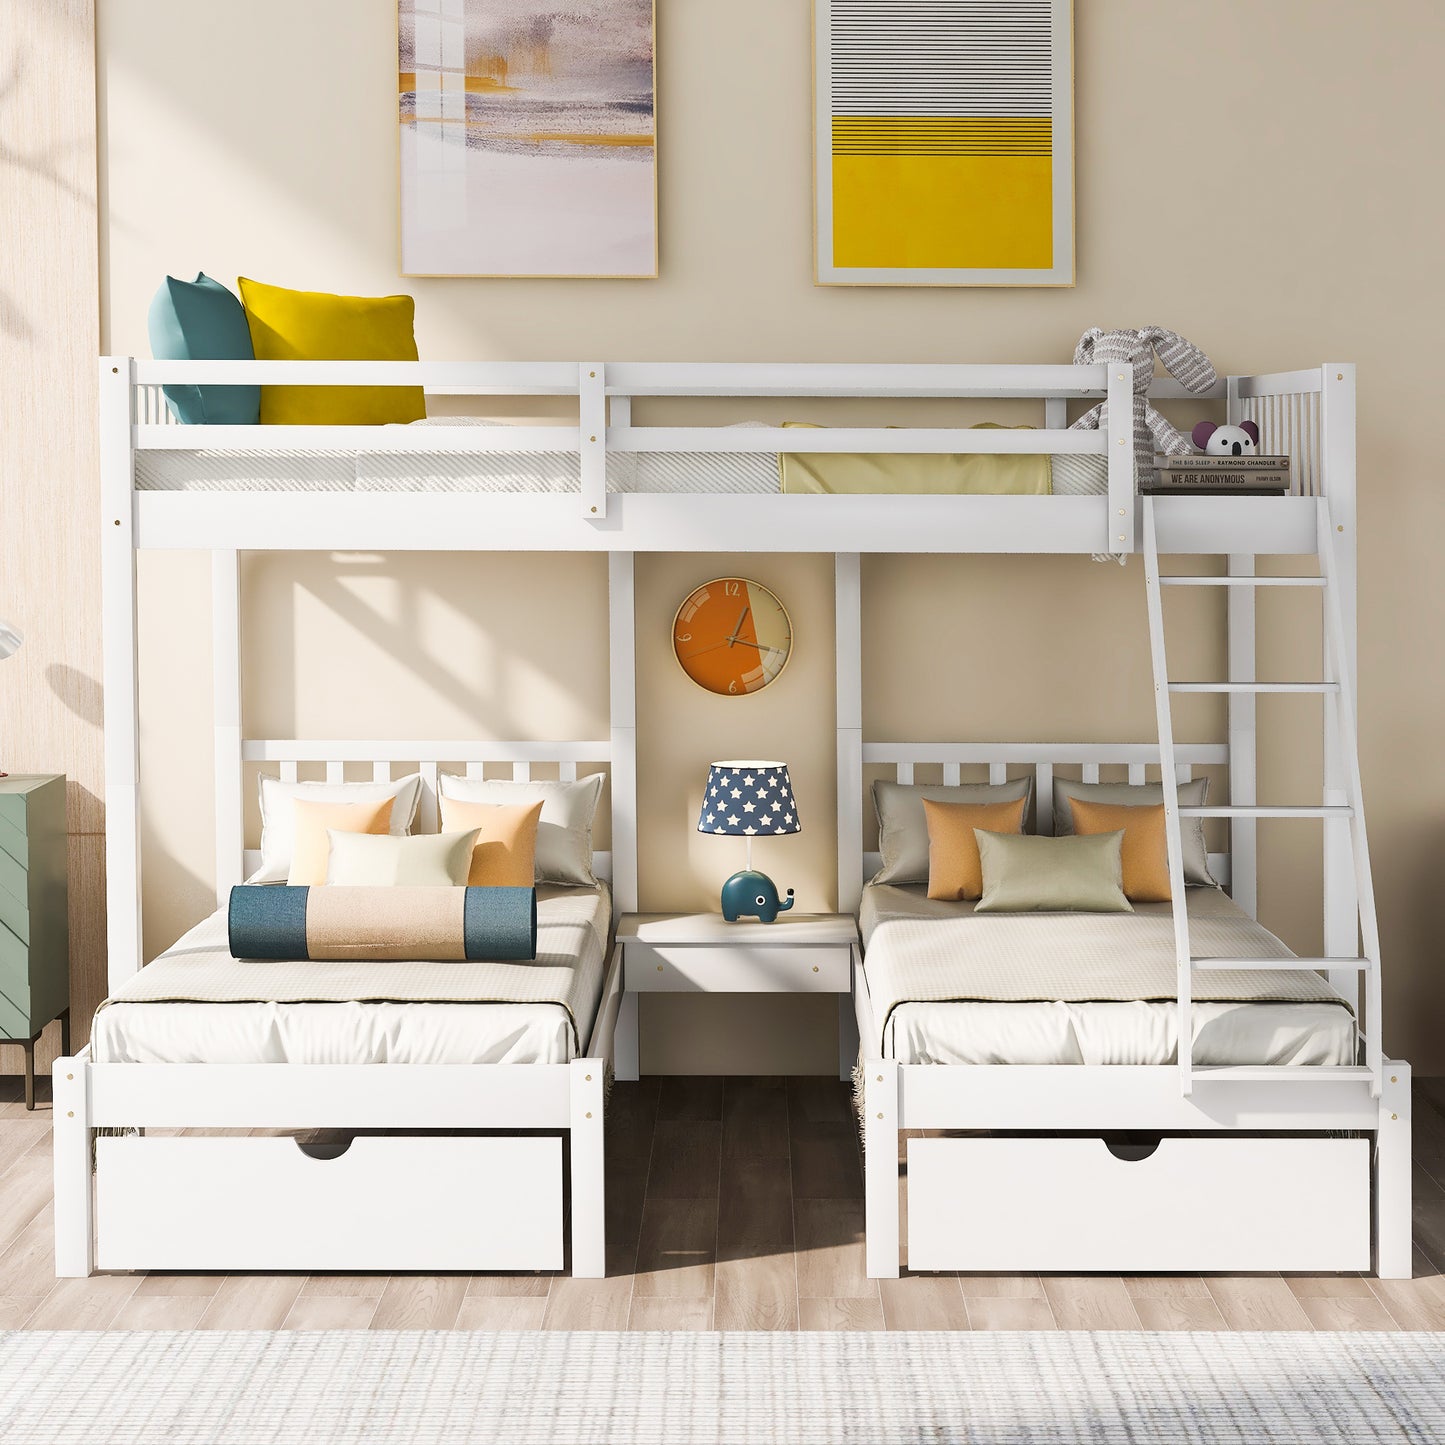 Full Over Twin & Twin Bunk Bed, Wood Triple Bunk Bed with Drawers and Guardrails, White